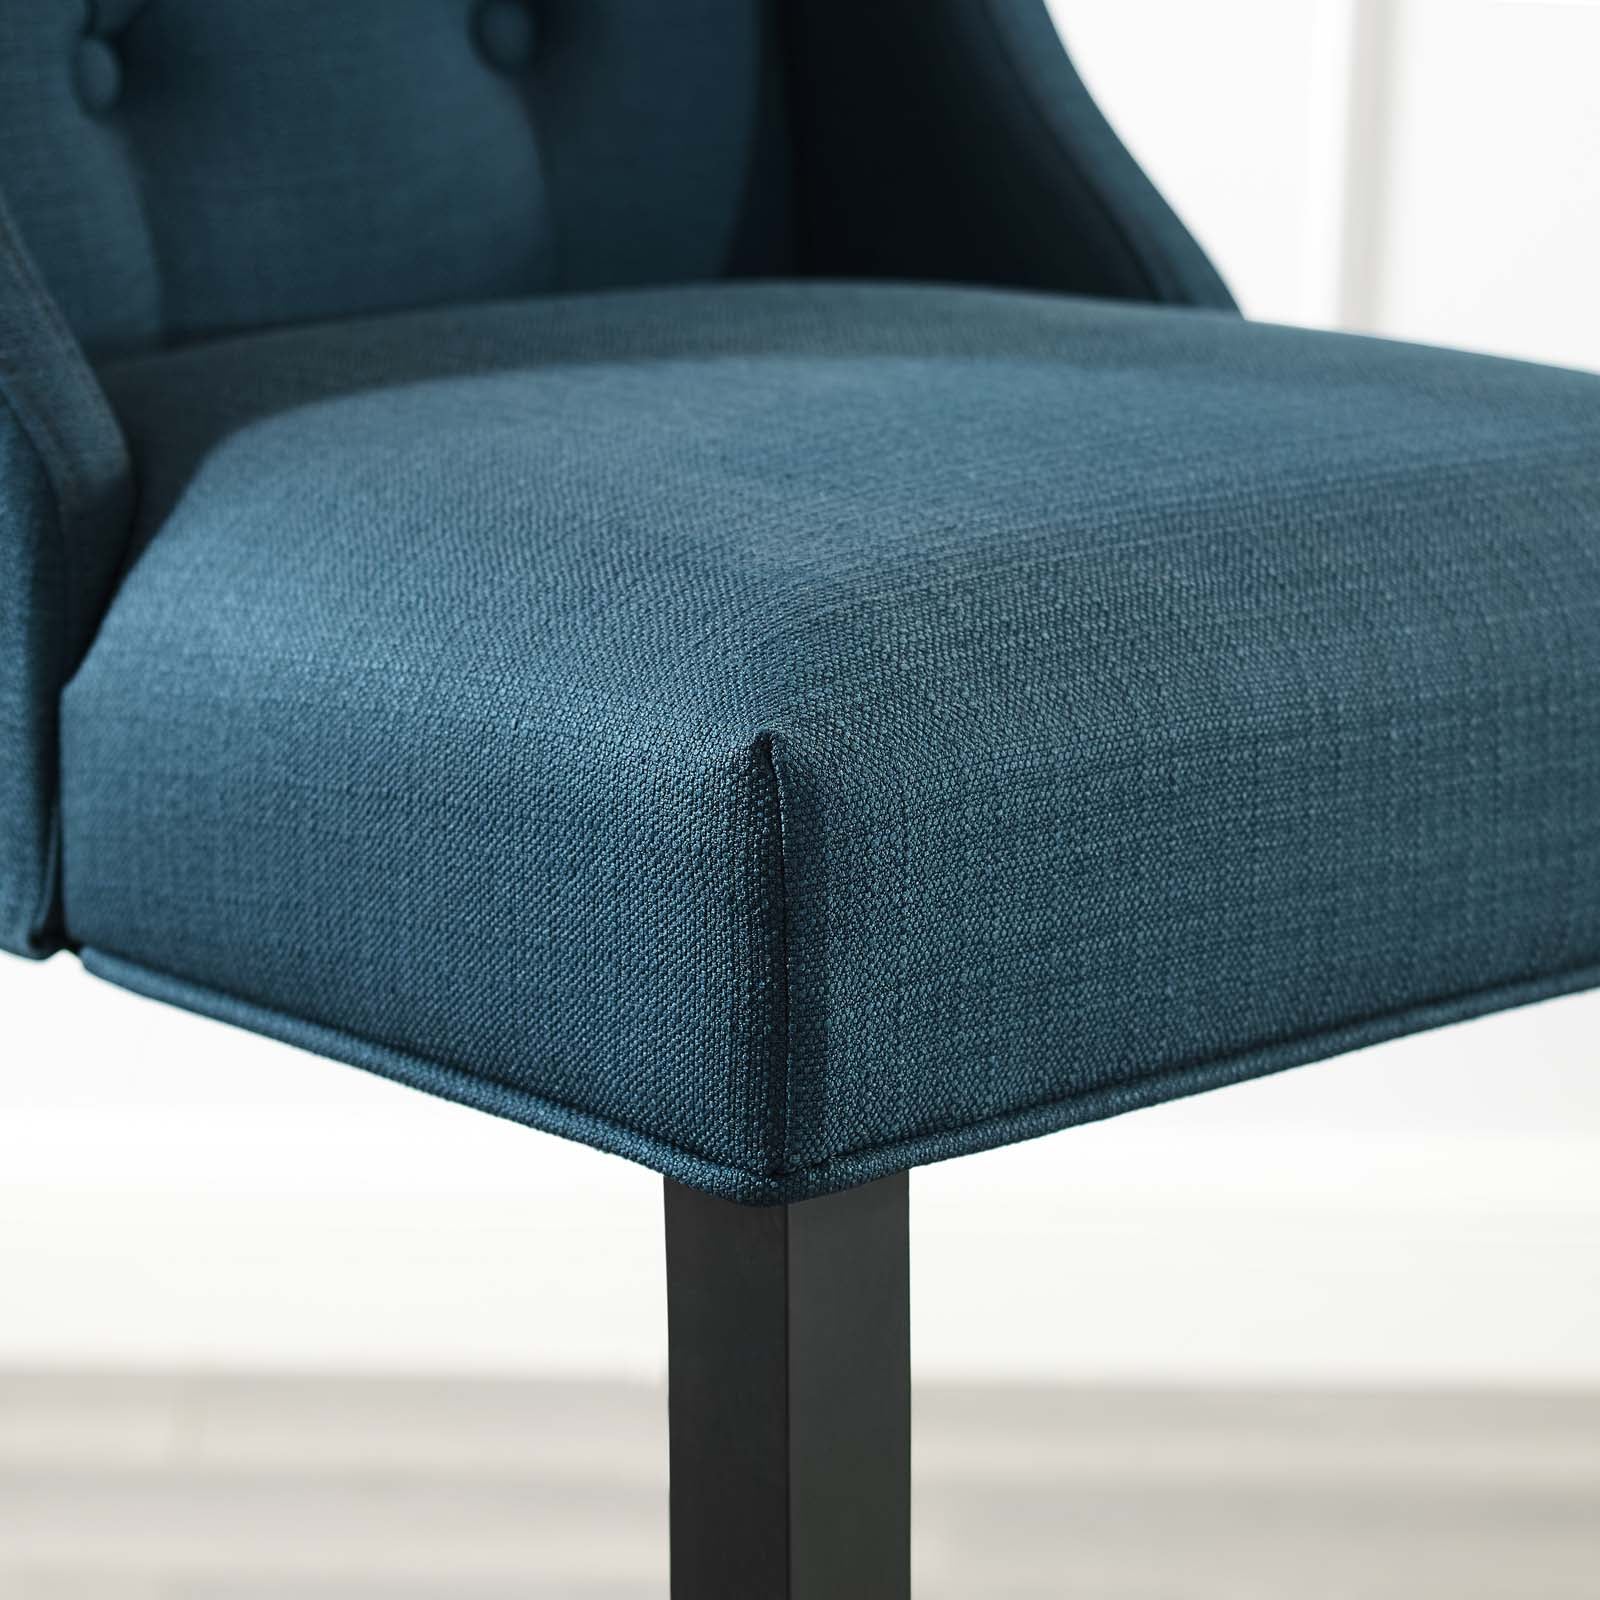 Baronet Tufted Button Upholstered Fabric Bar Stool-Bar Stool-Modway-Wall2Wall Furnishings